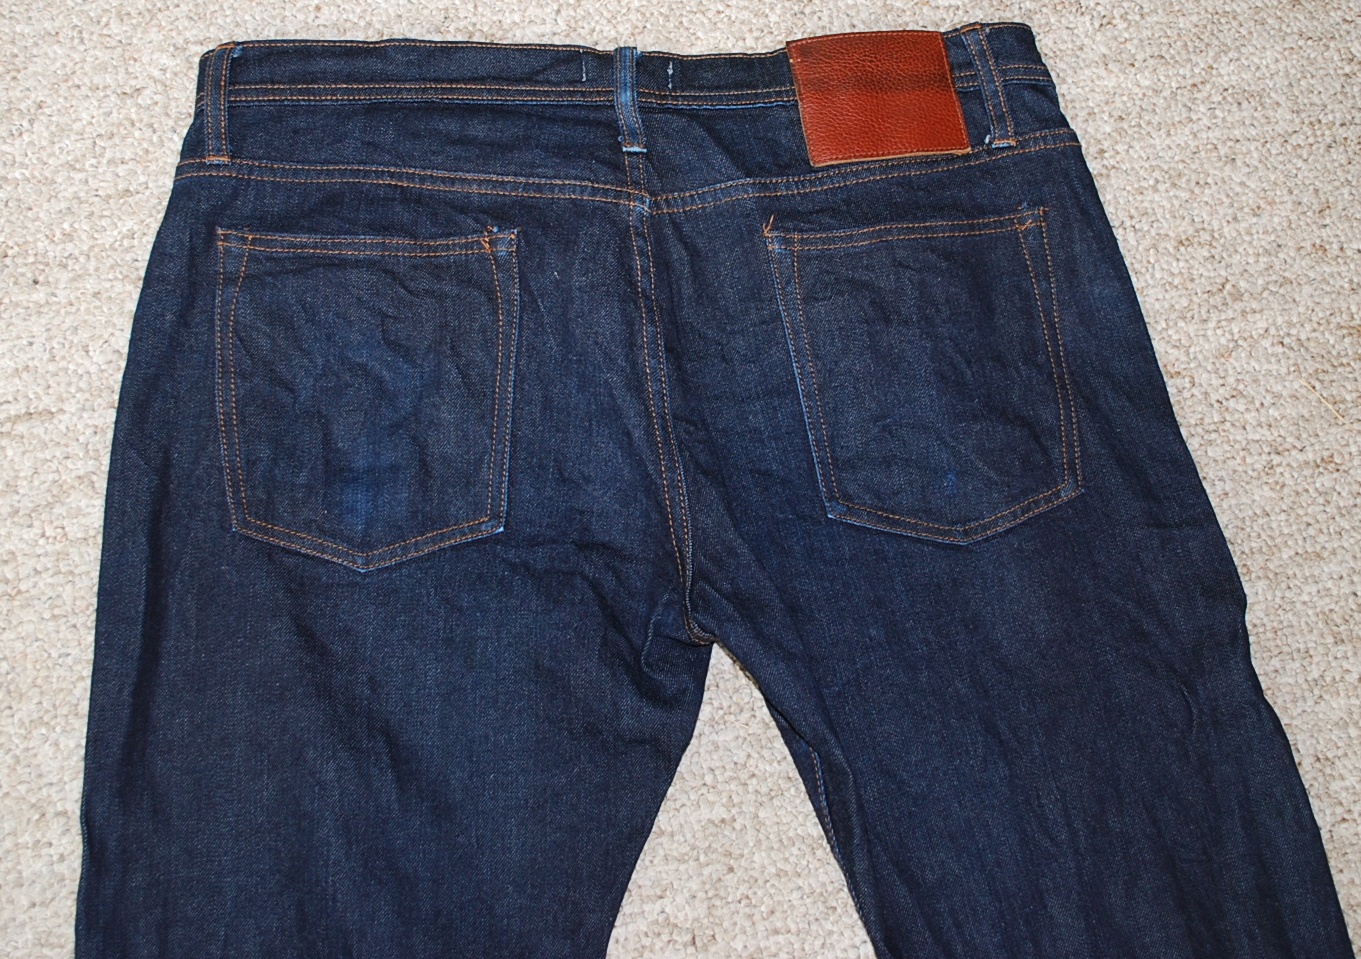 Unbranded Jeans Size 36 x 33 Selvedge Denim | The Fedora Lounge